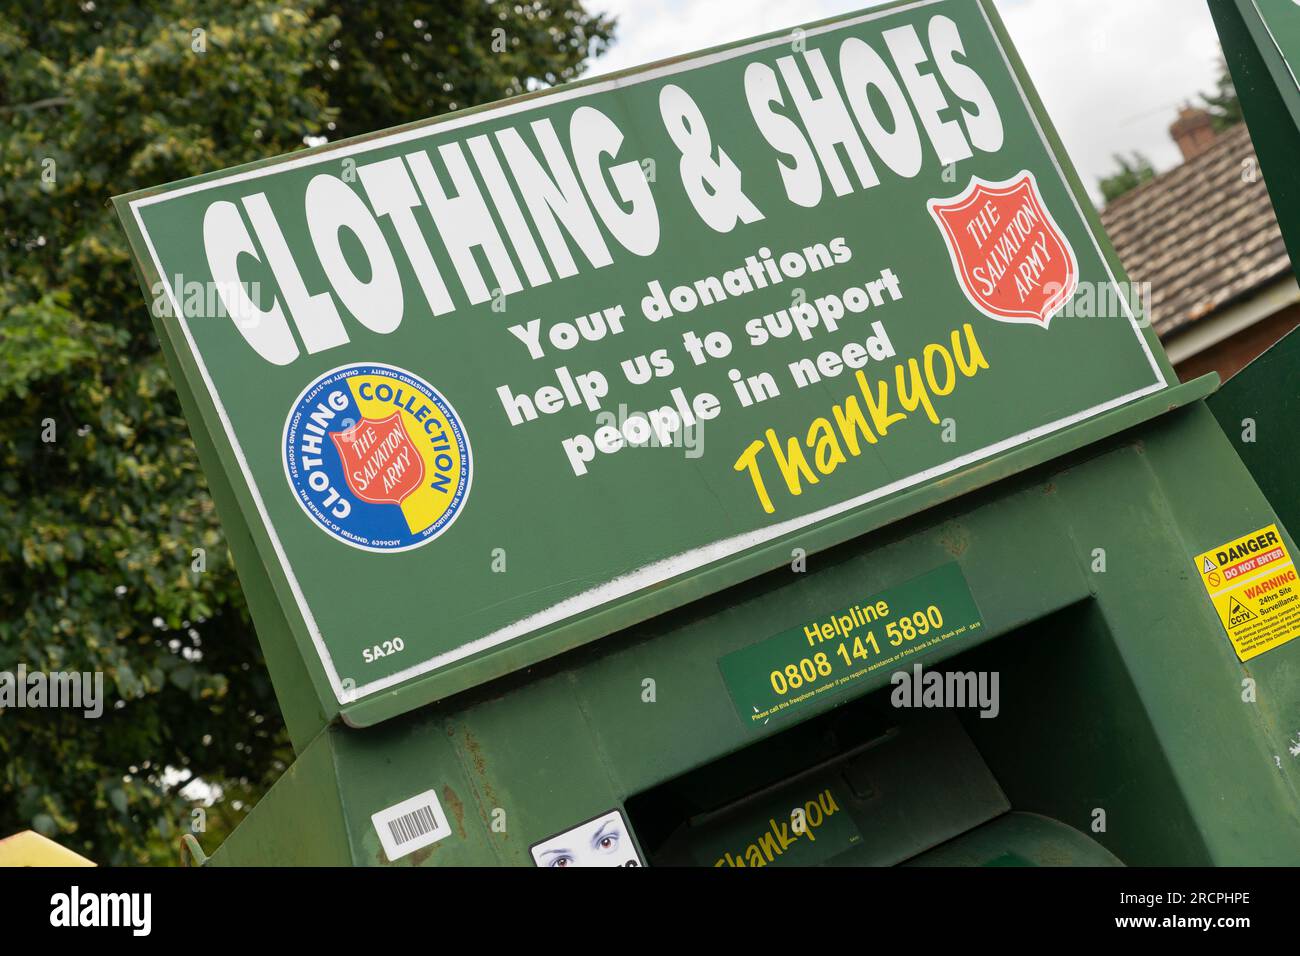 Salvation Army clothing and shoe collection banks for donations of unwanted clothes to charity, Hook, England. Concept: giving to charity Stock Photo